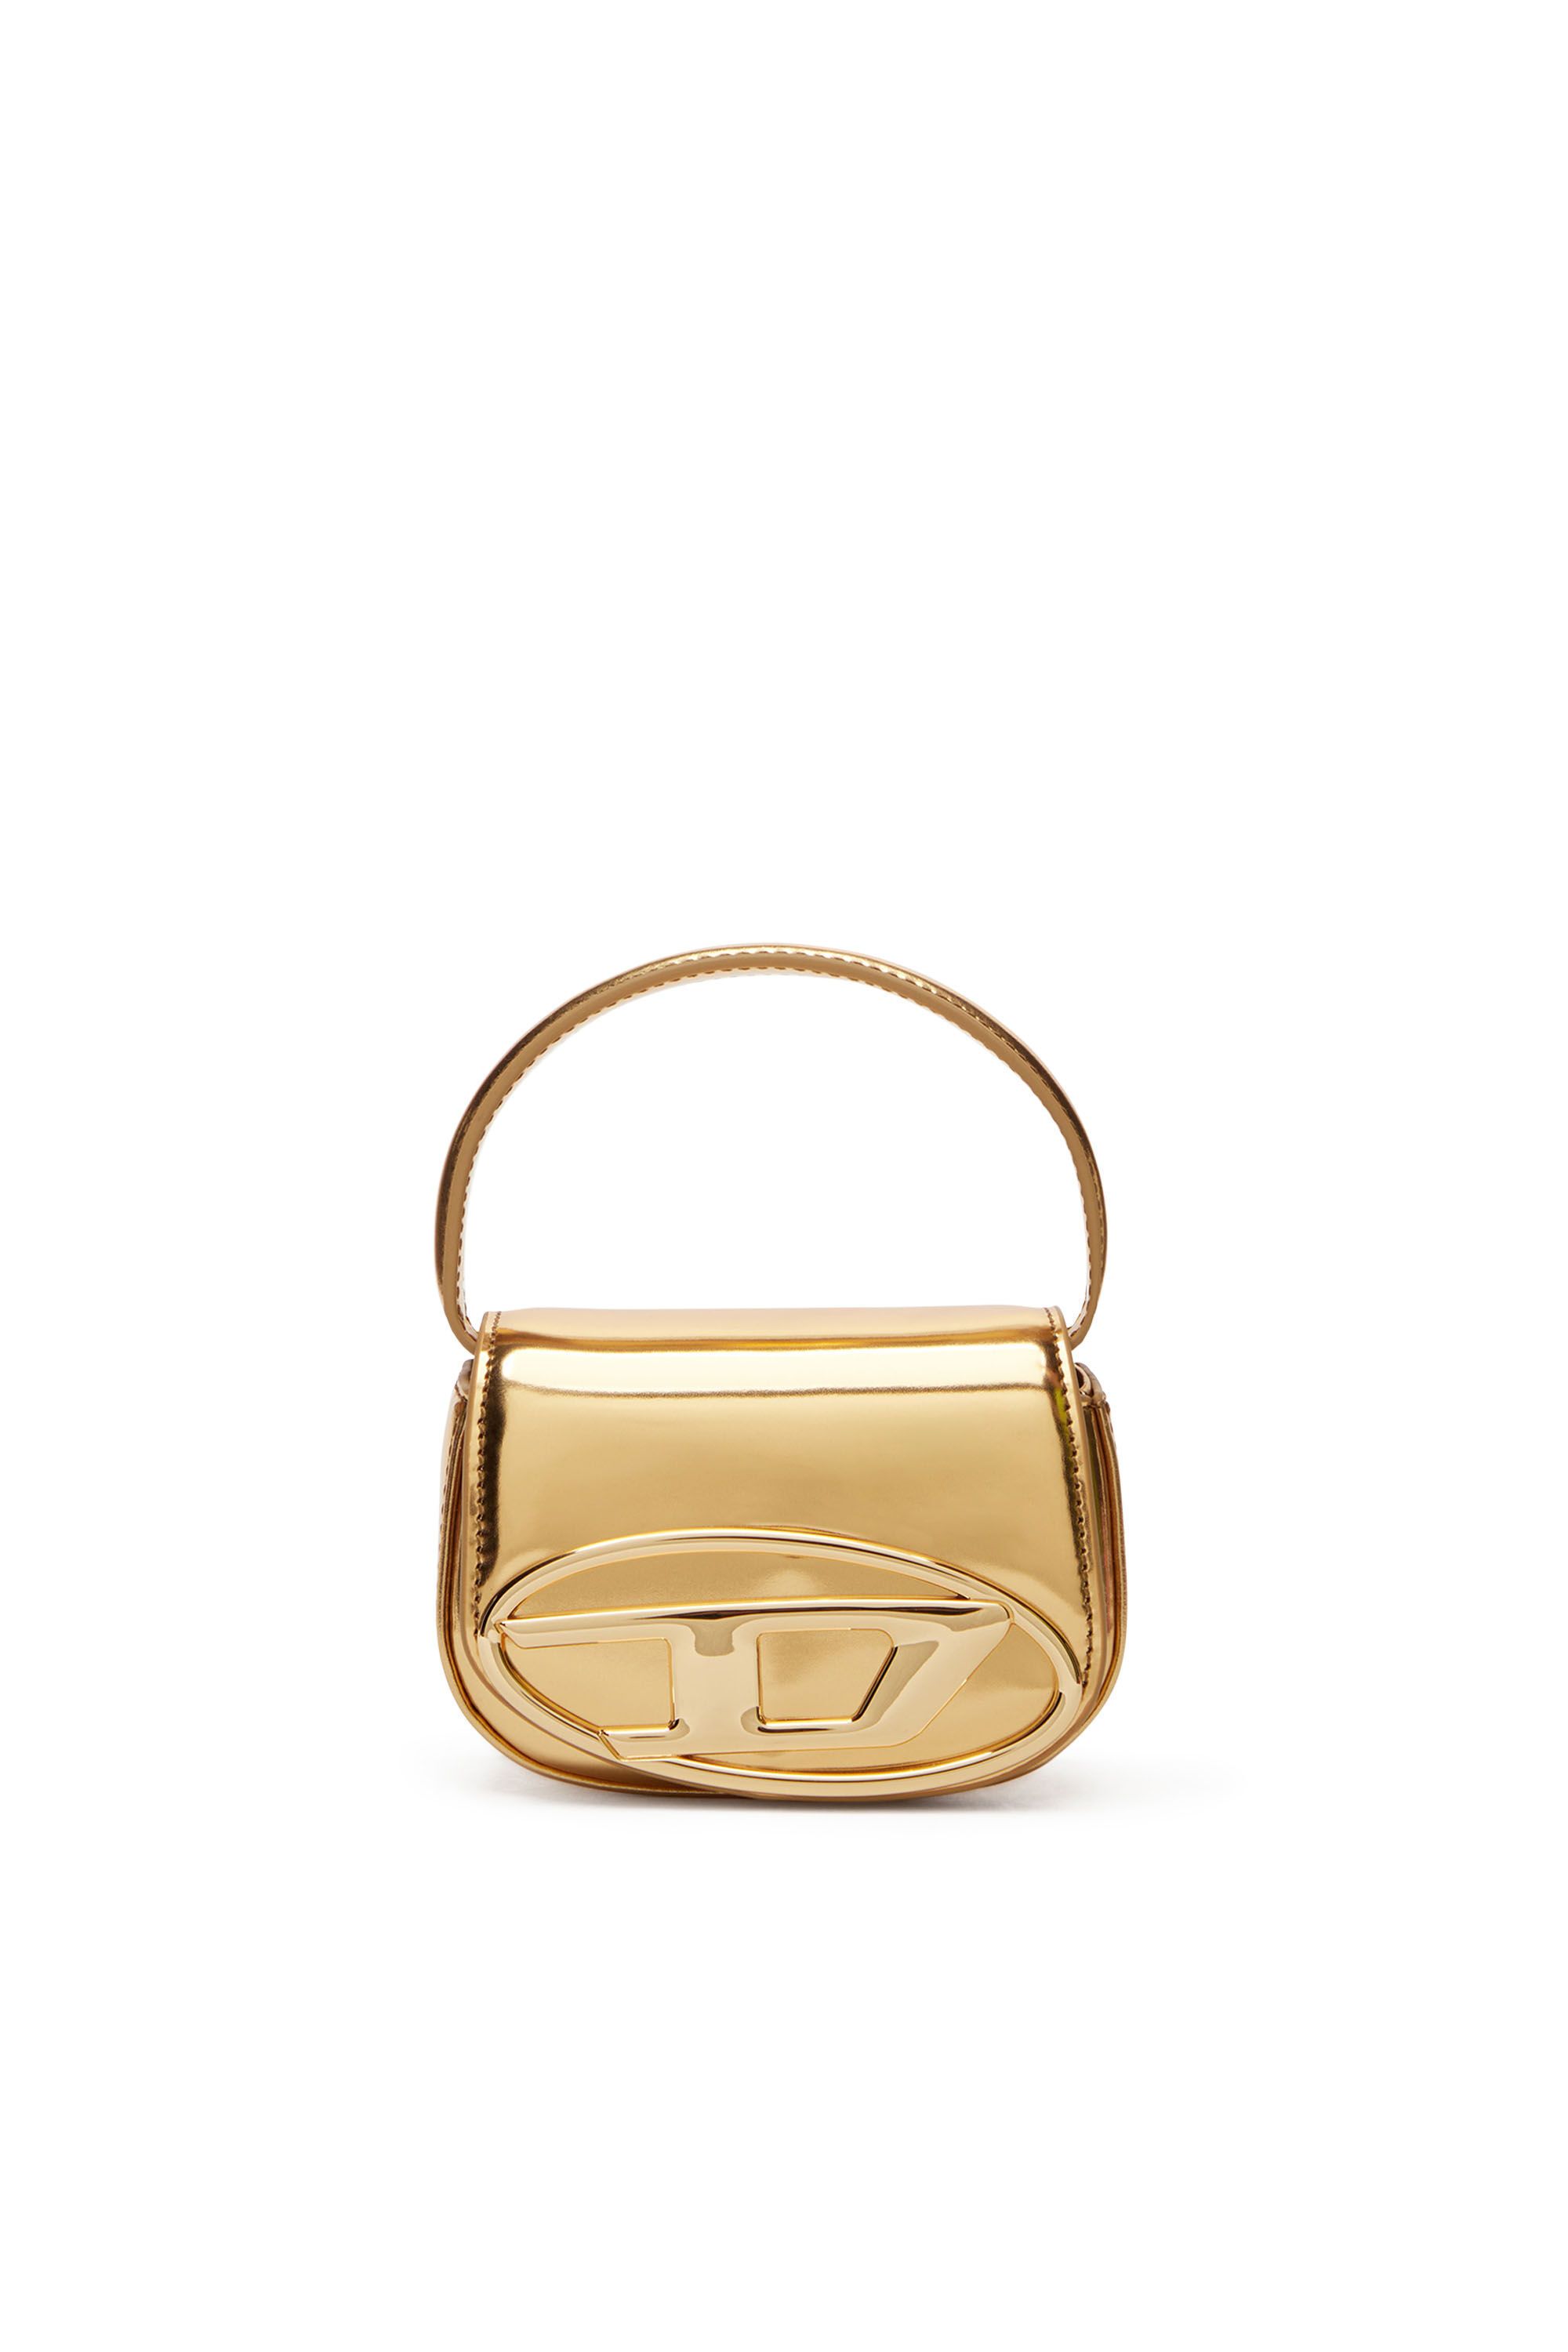 Diesel - 1DR-XS-S, Woman 1DR-XS-S-Iconic mini bag in mirrored leather in Oro - Image 1